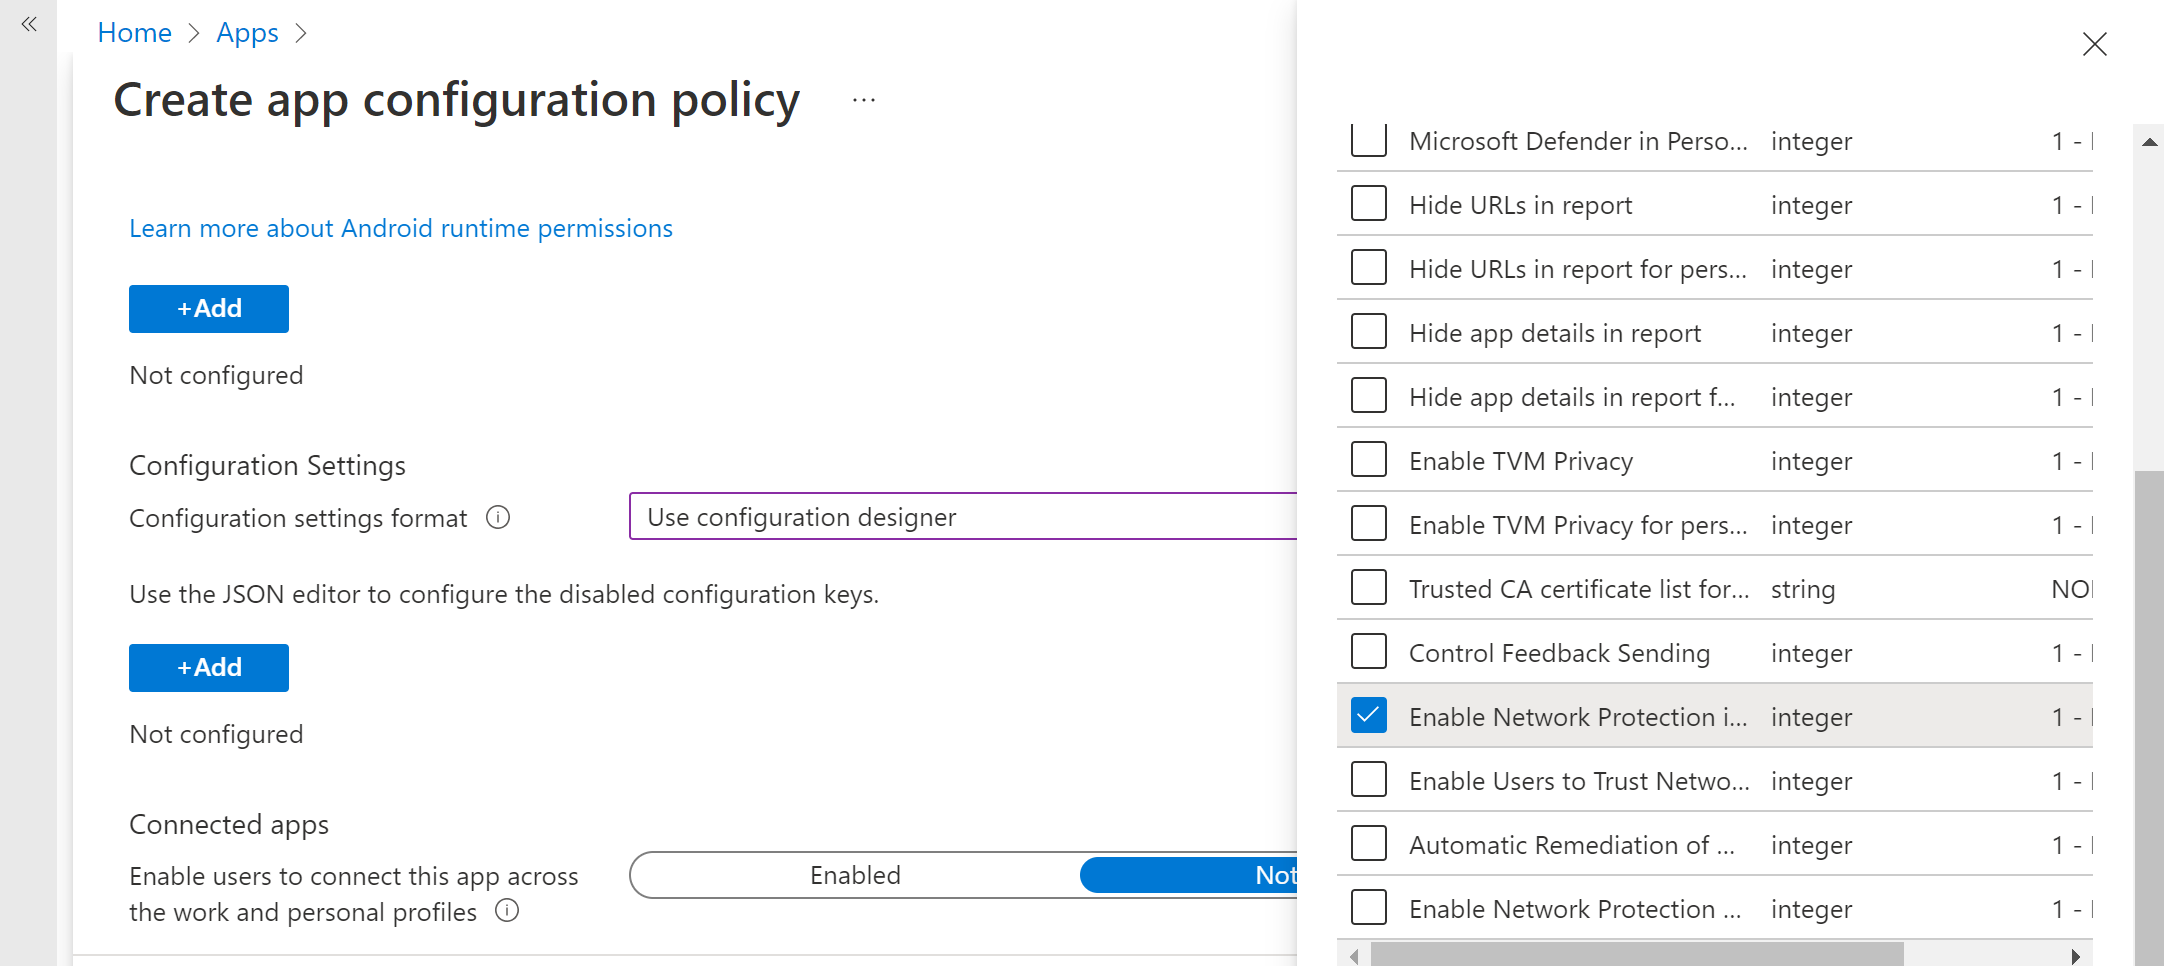 Image of how to select enable network protection policy